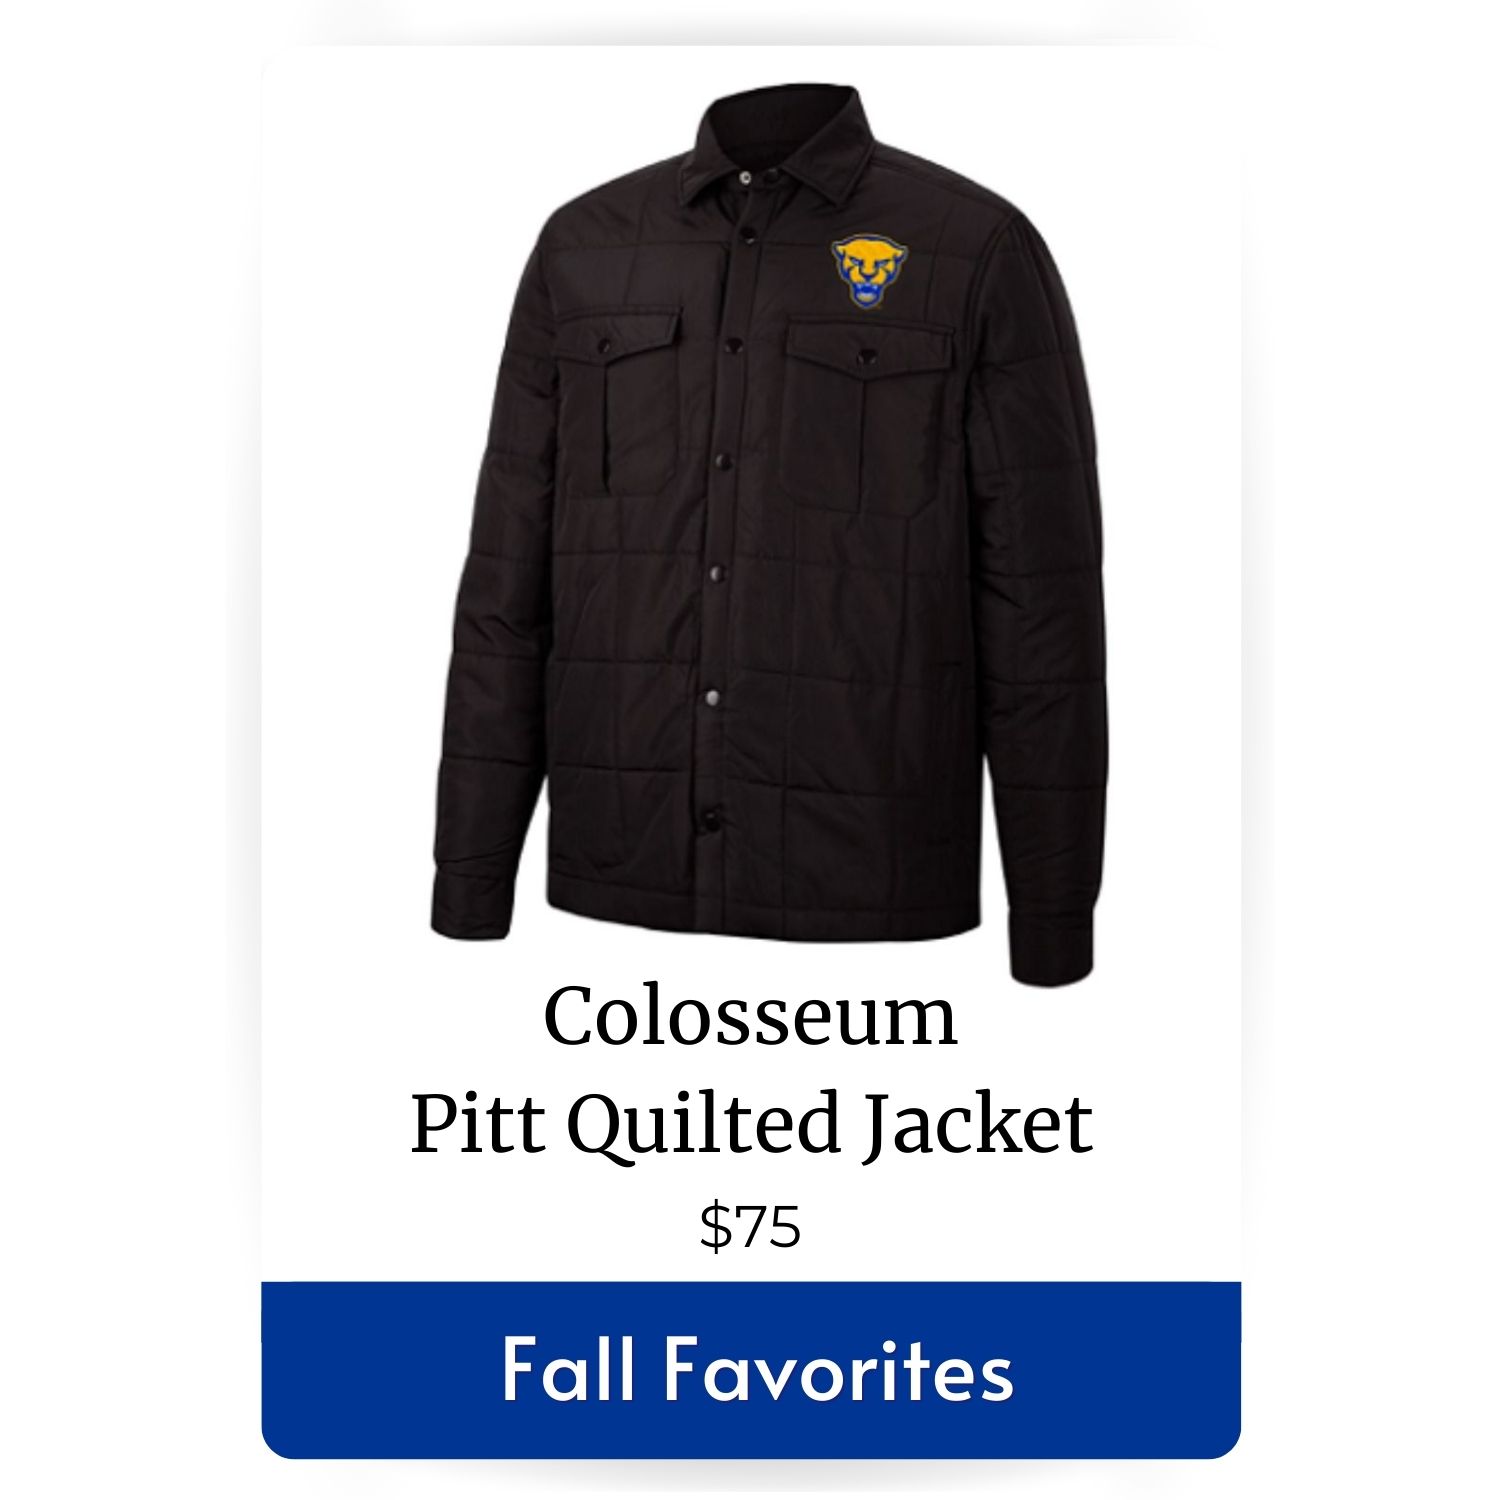 Colosseum Pitt Quilted Jacket image